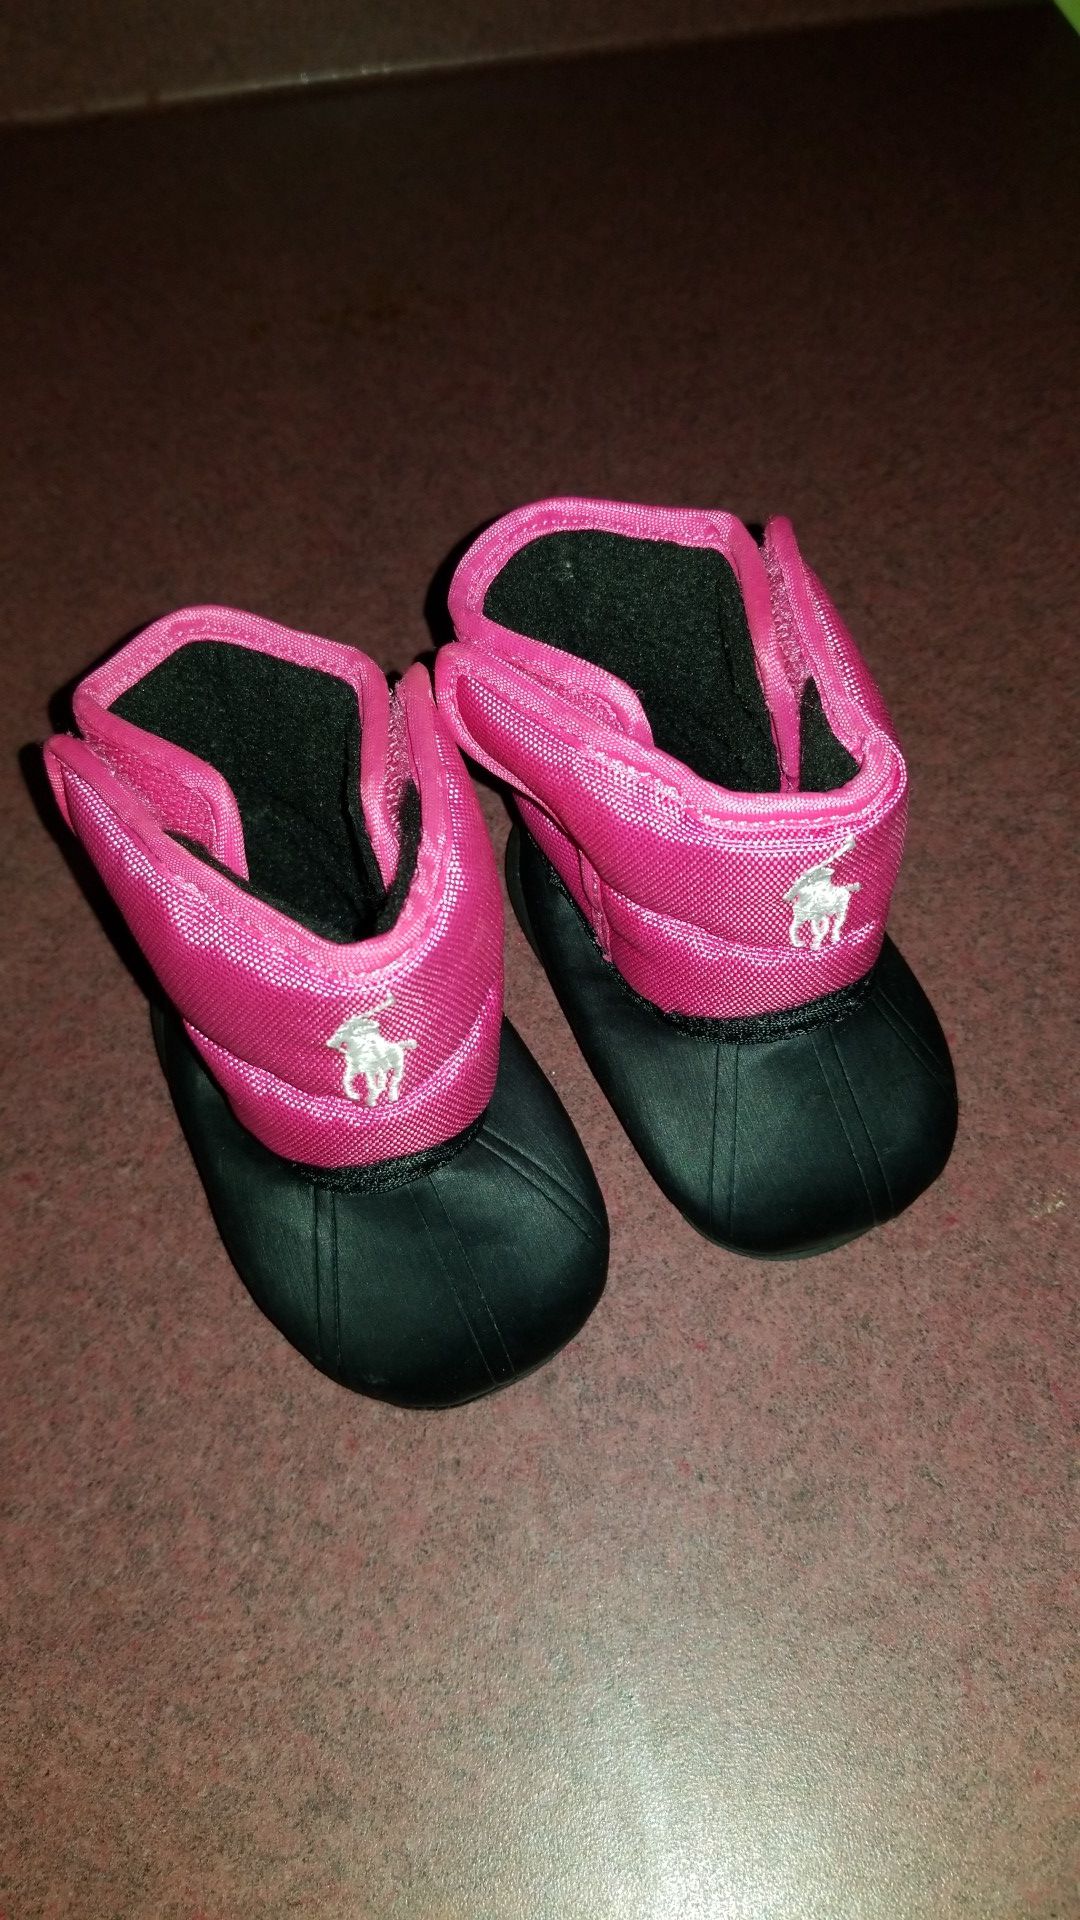 Polo infant girl waterproof boots size 0